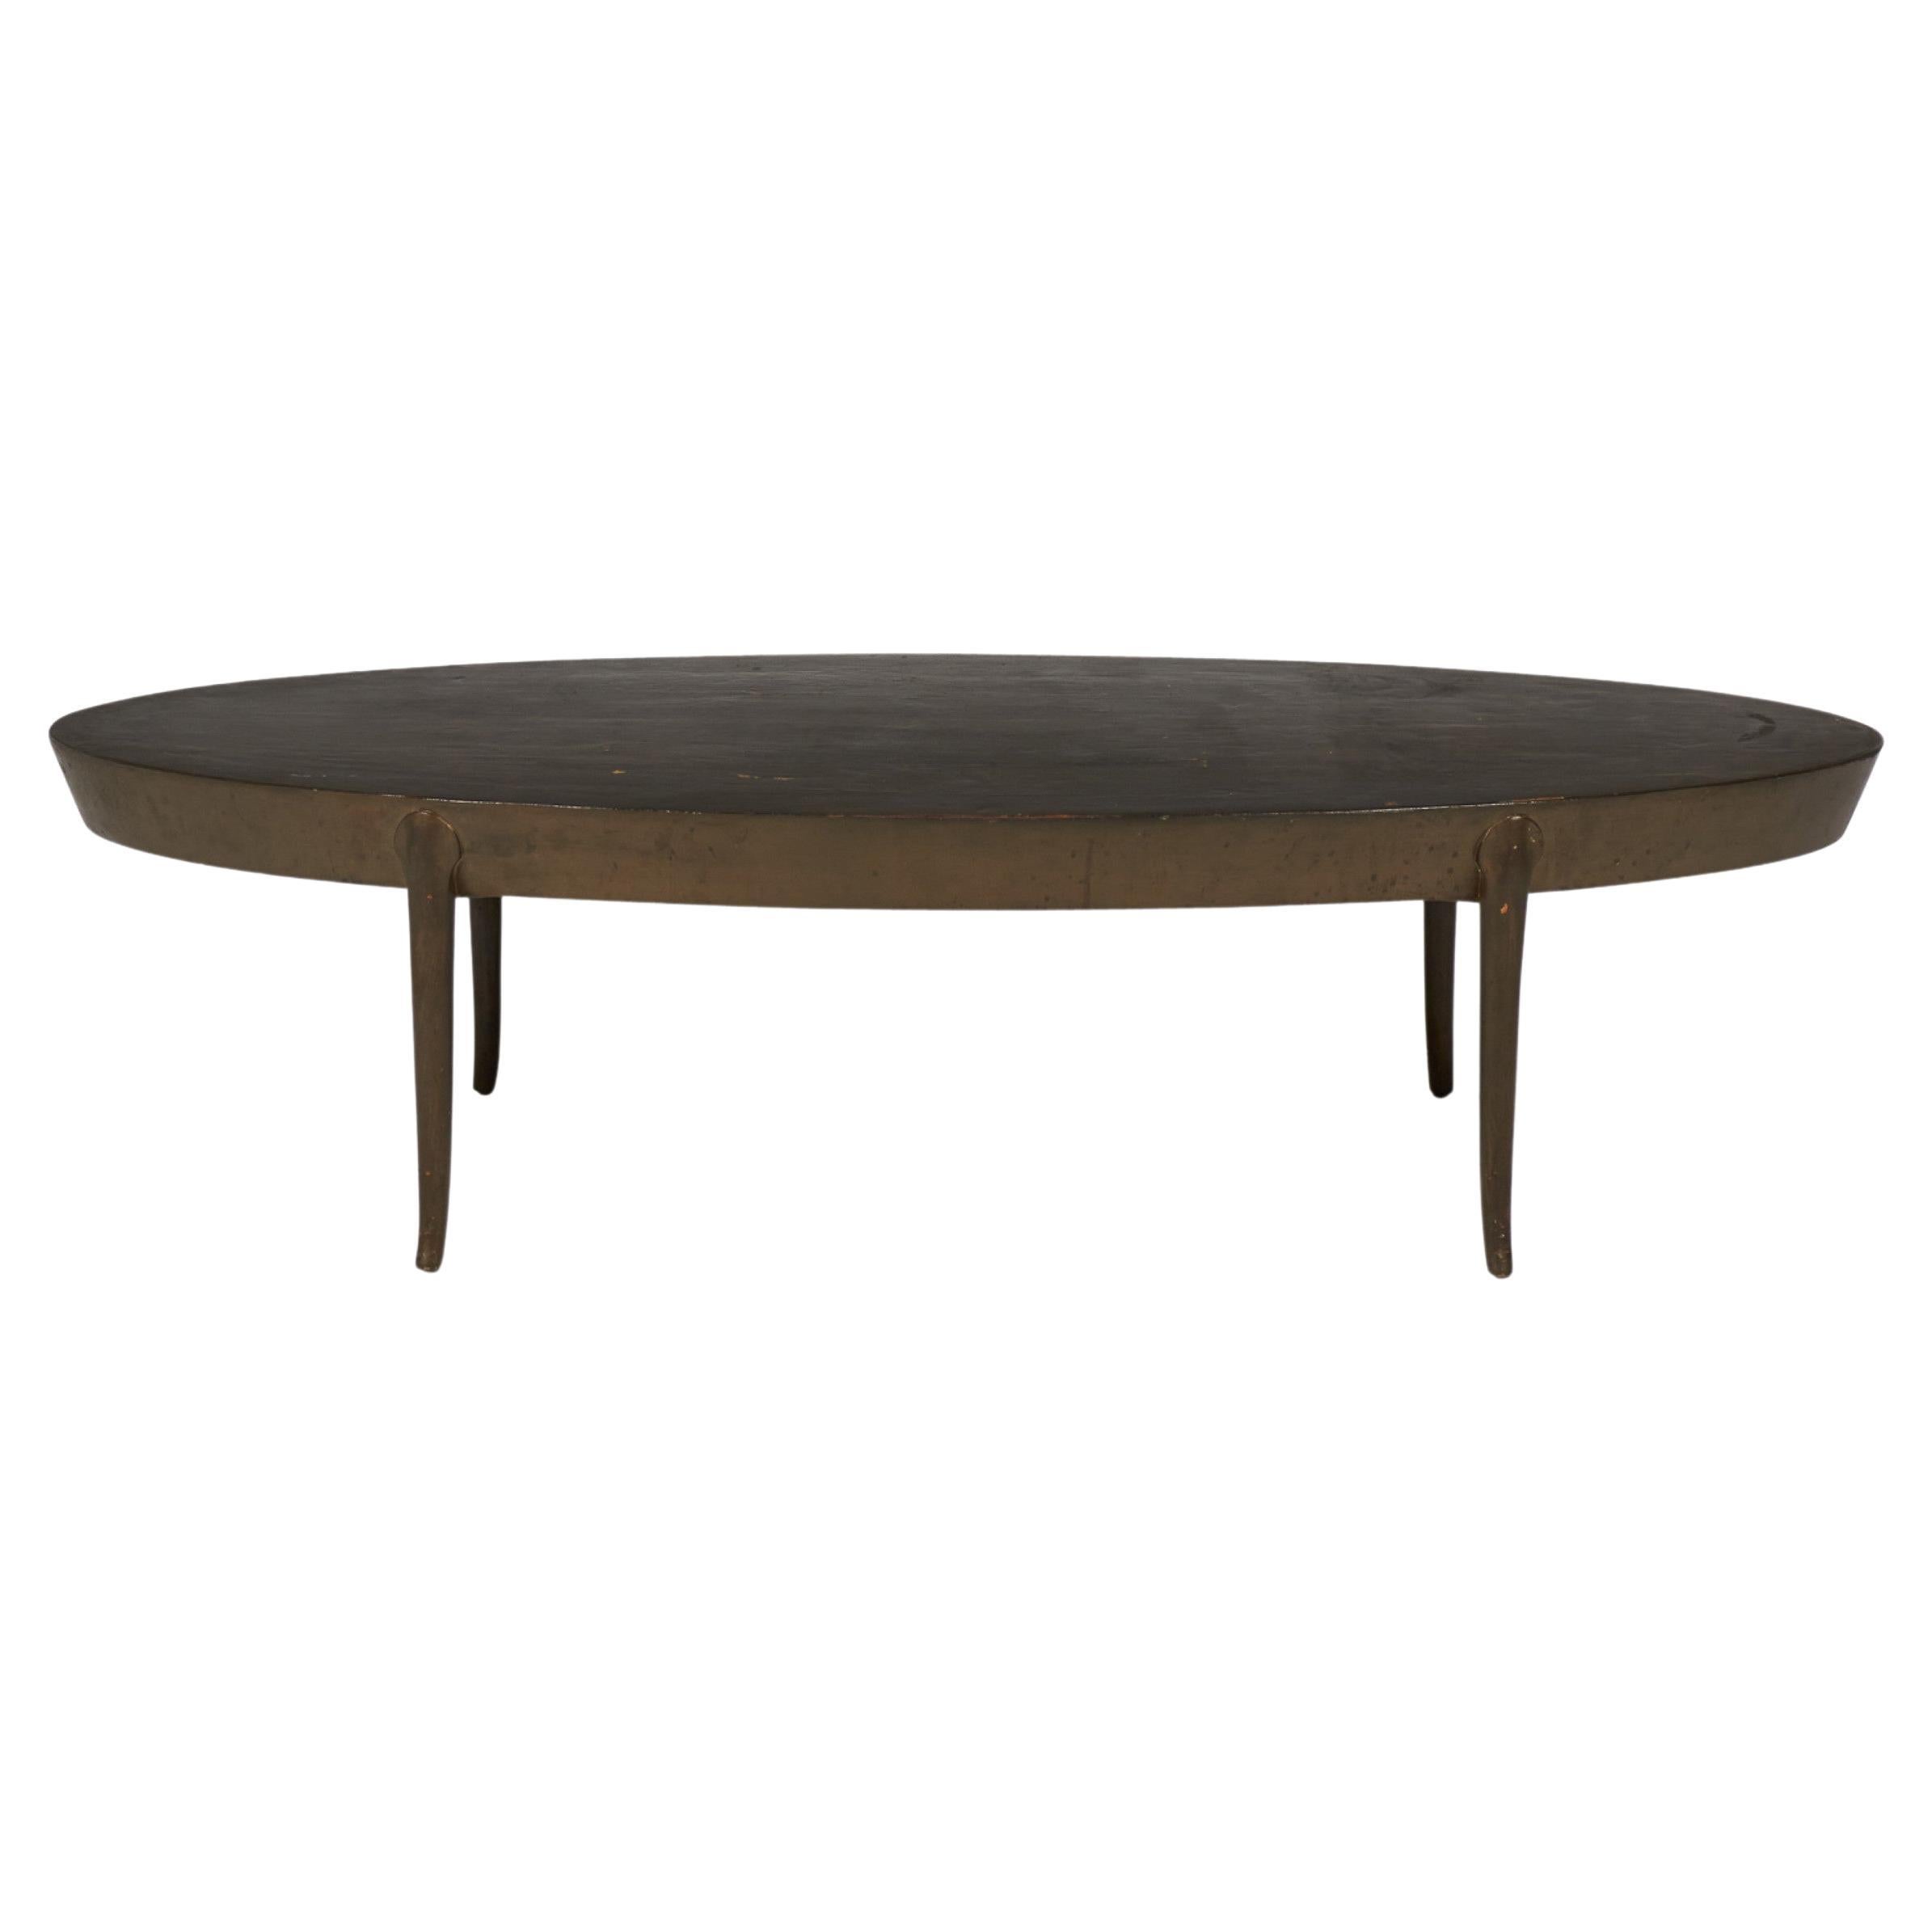 T.H. Robsjohn-Gibbings American Mid-Century Oval Wooden Cocktail / Coffee Table For Sale